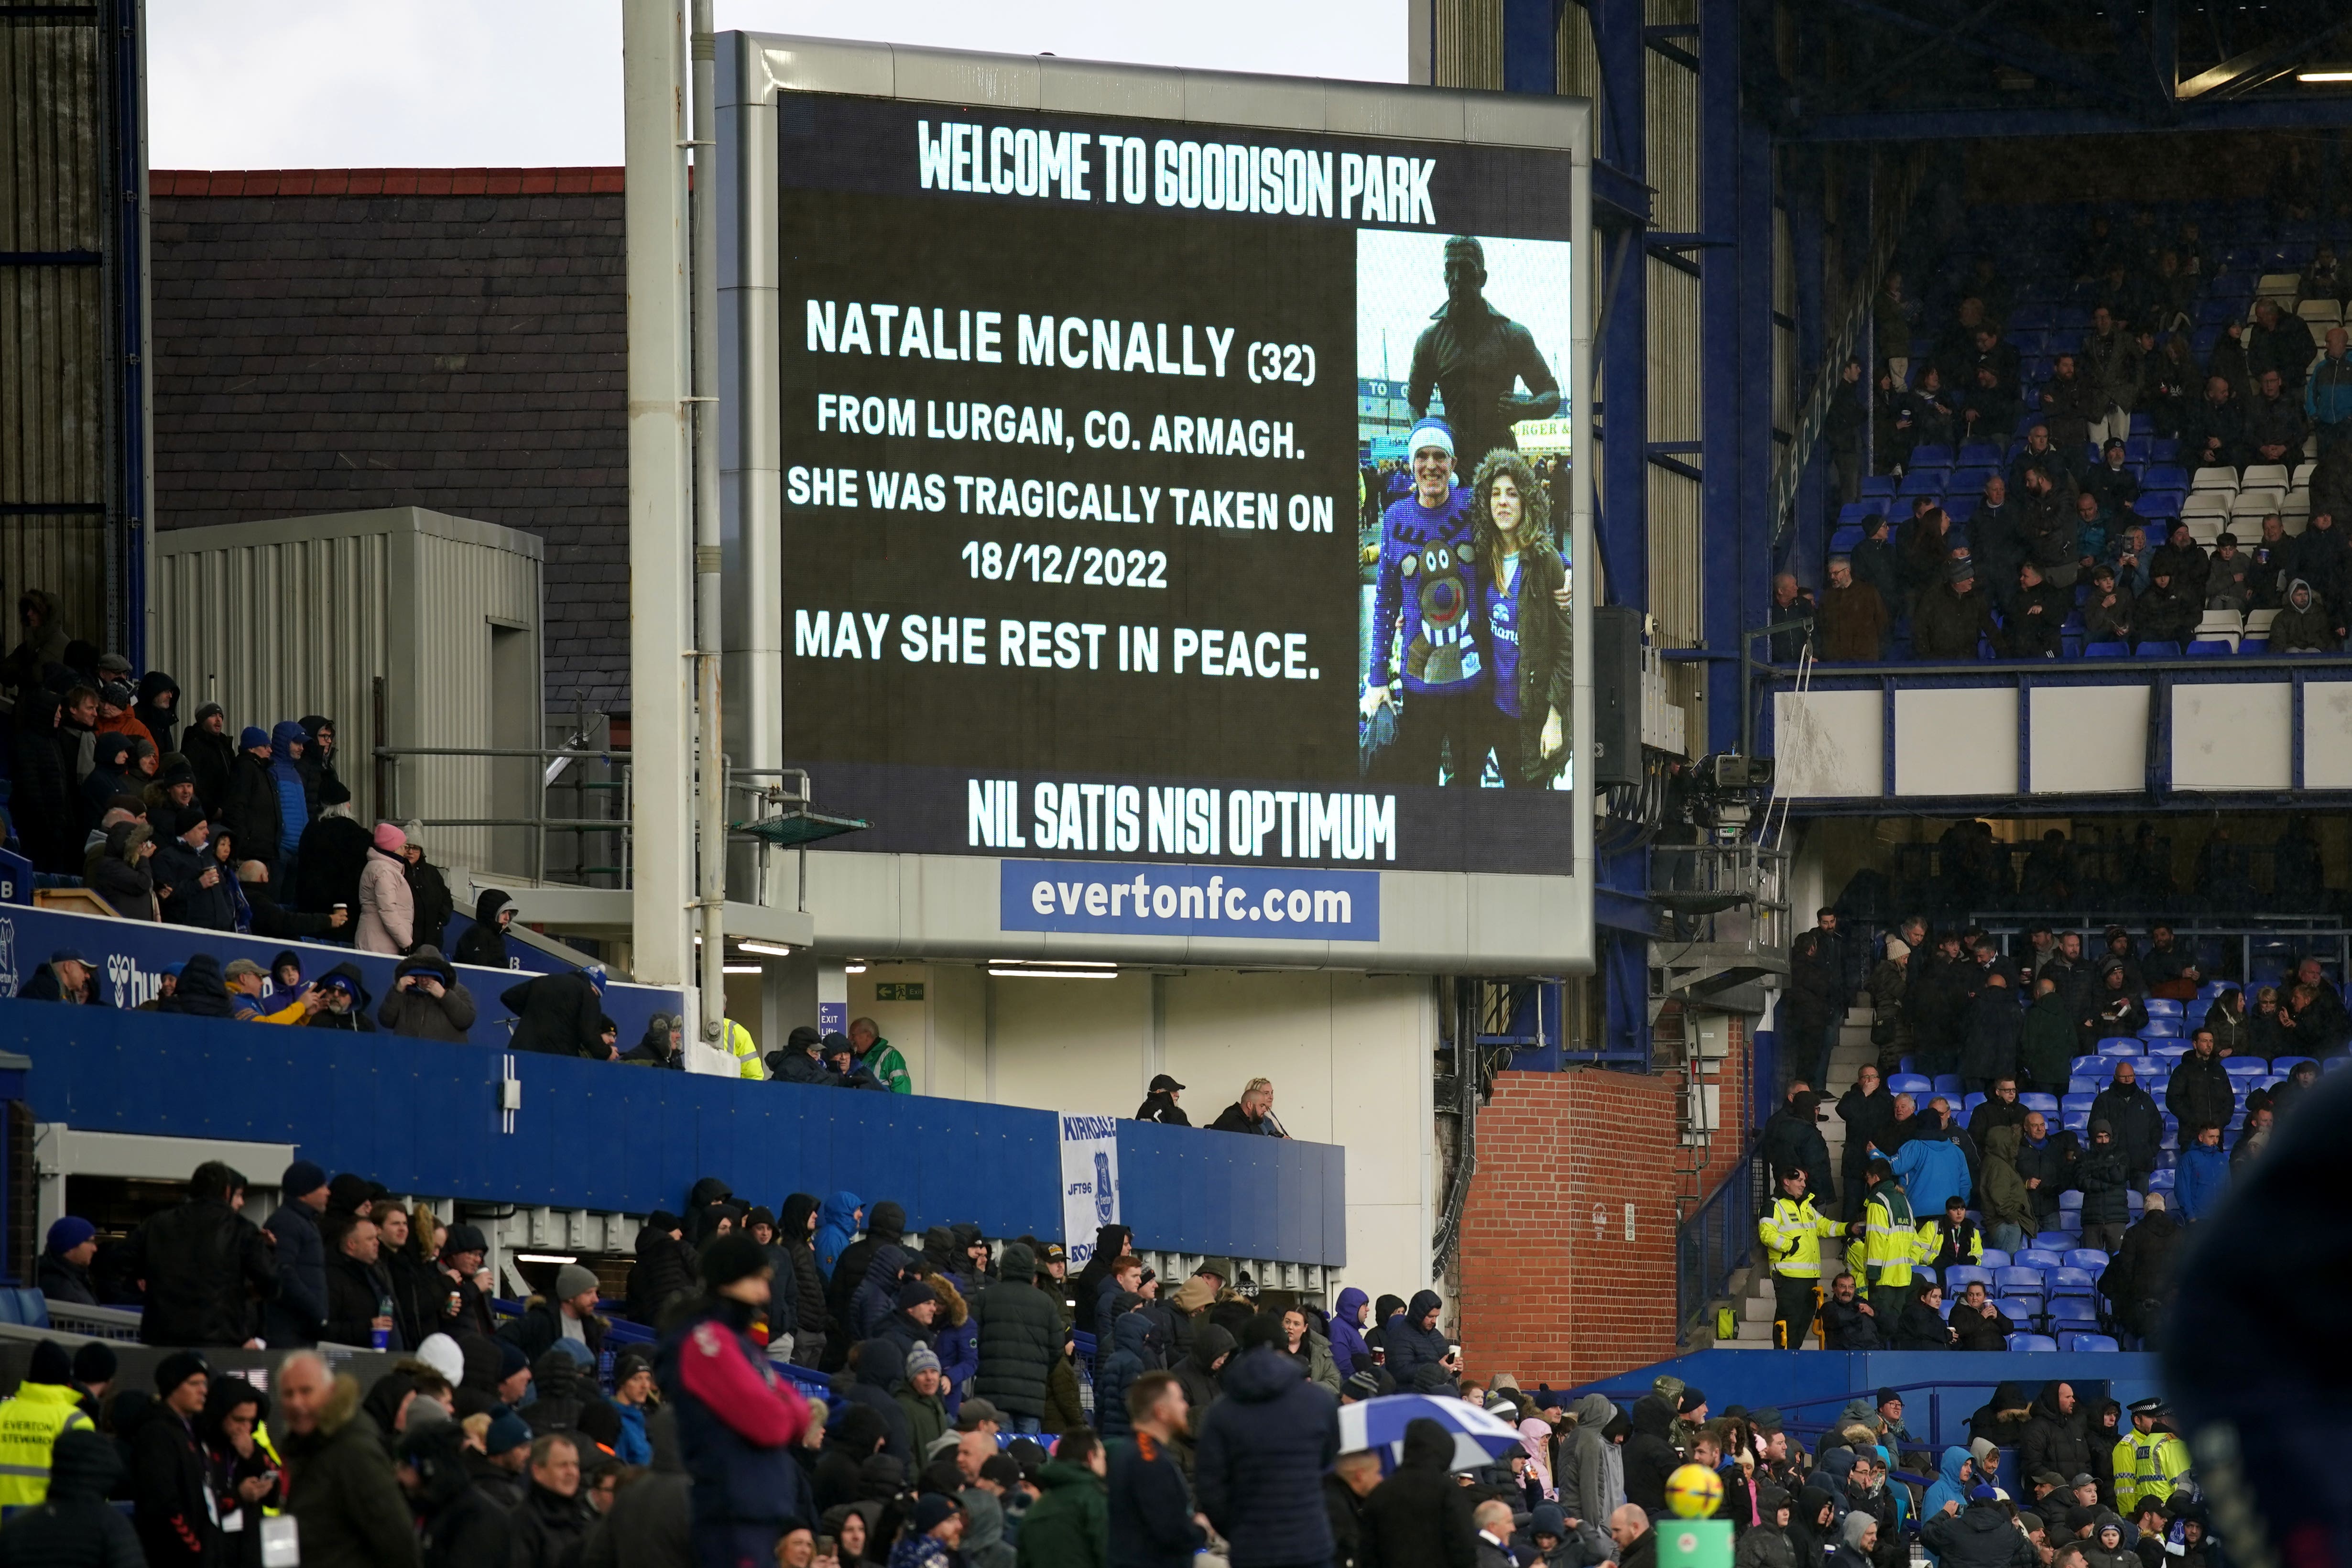 A tribute in memory of Natalie McNally is displayed prior to the Premier League match between Everton and Southampton at Goodison Park (Peter Byrne/PA)